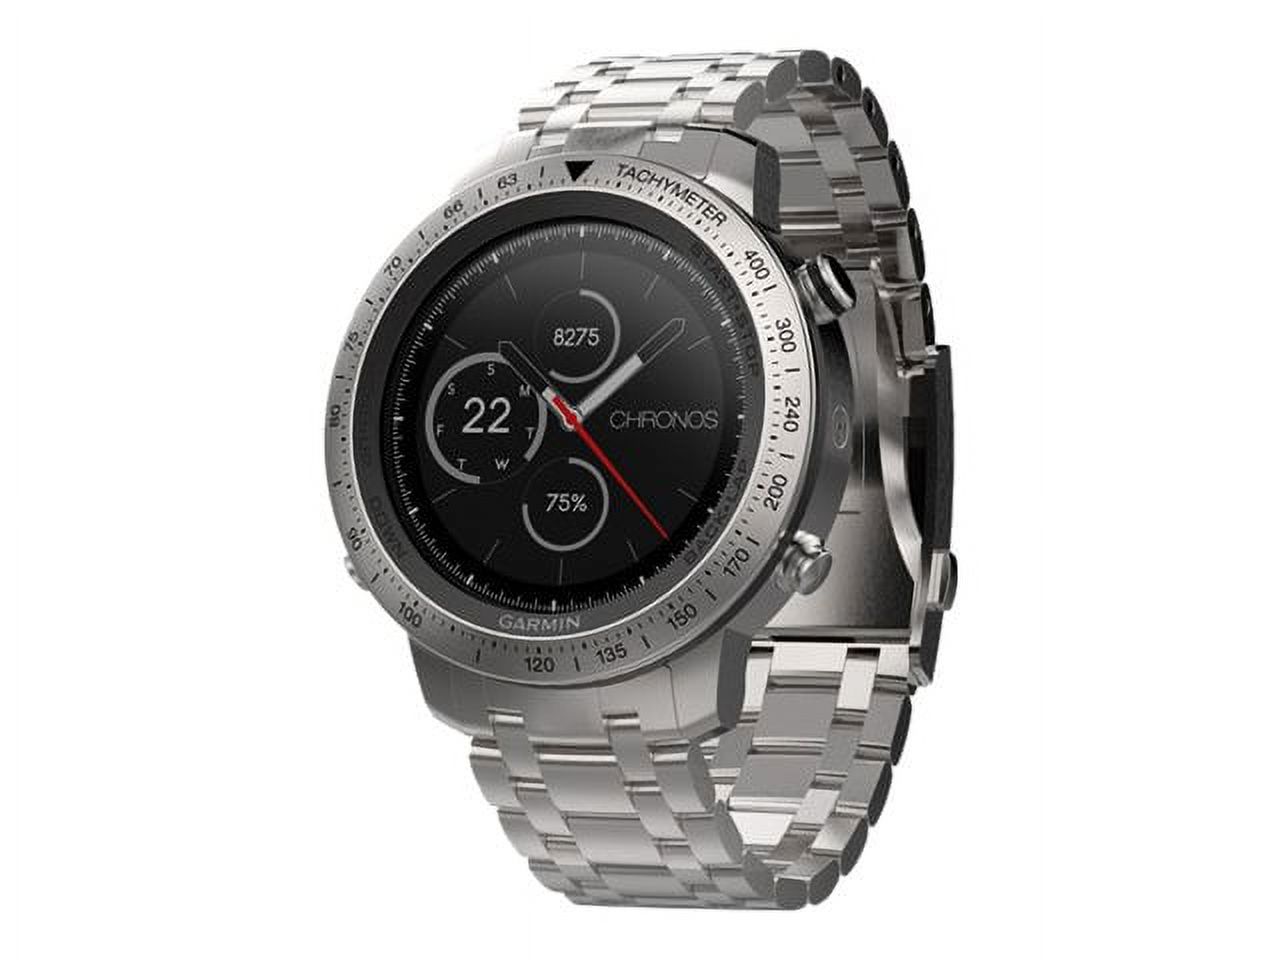 Fenix Chronos GPS Multi Sport Smart Fitness Brushed Stainless Steel Watch - image 1 of 4